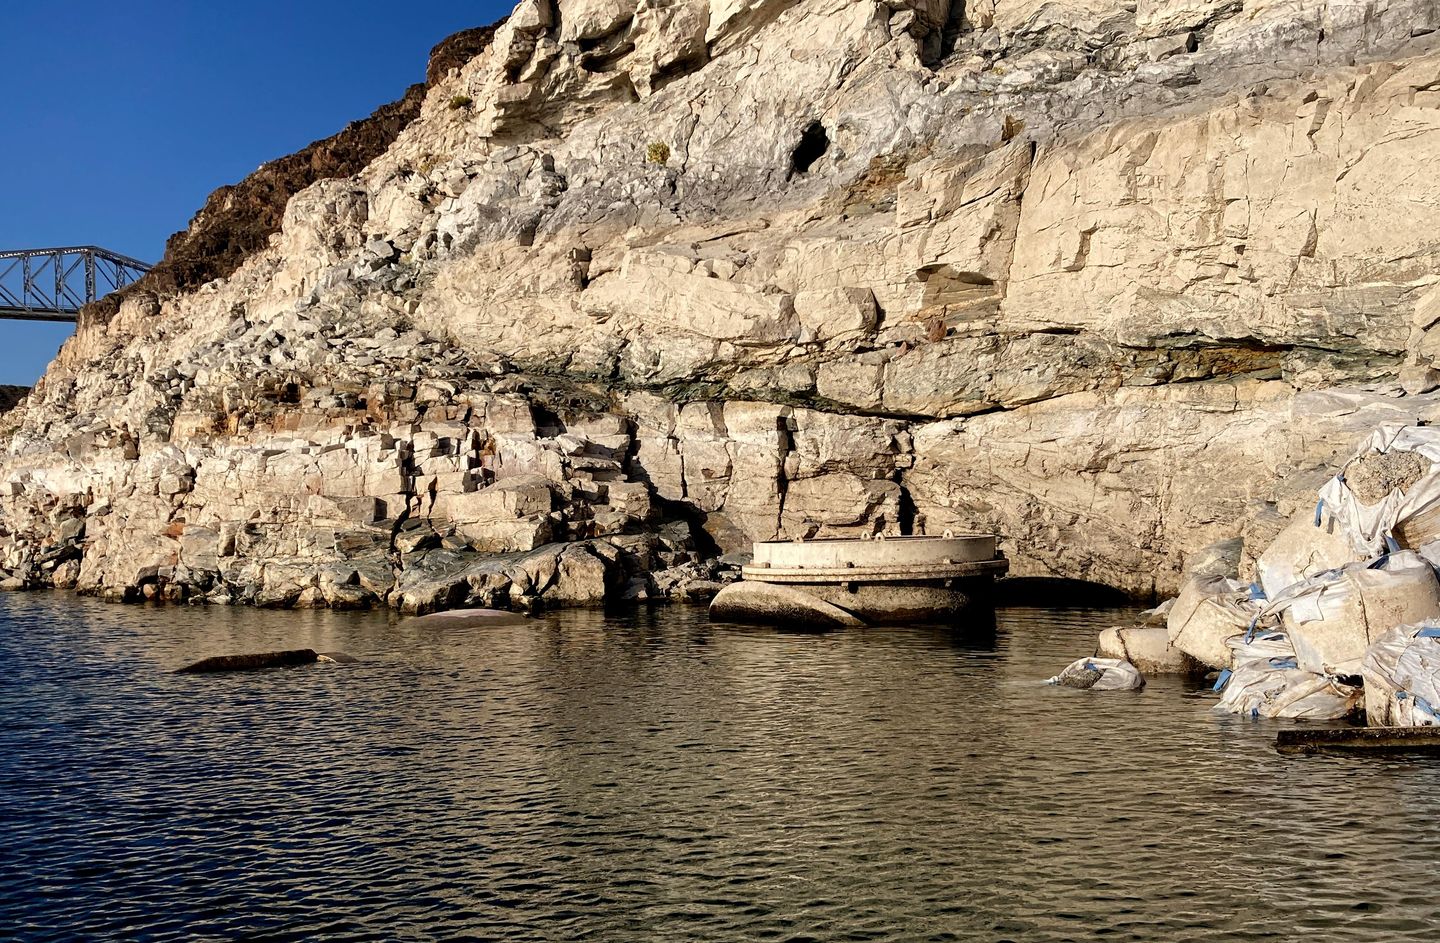 Receding shoreline reveals another set of human remains at Lake Mead's Swim Beach